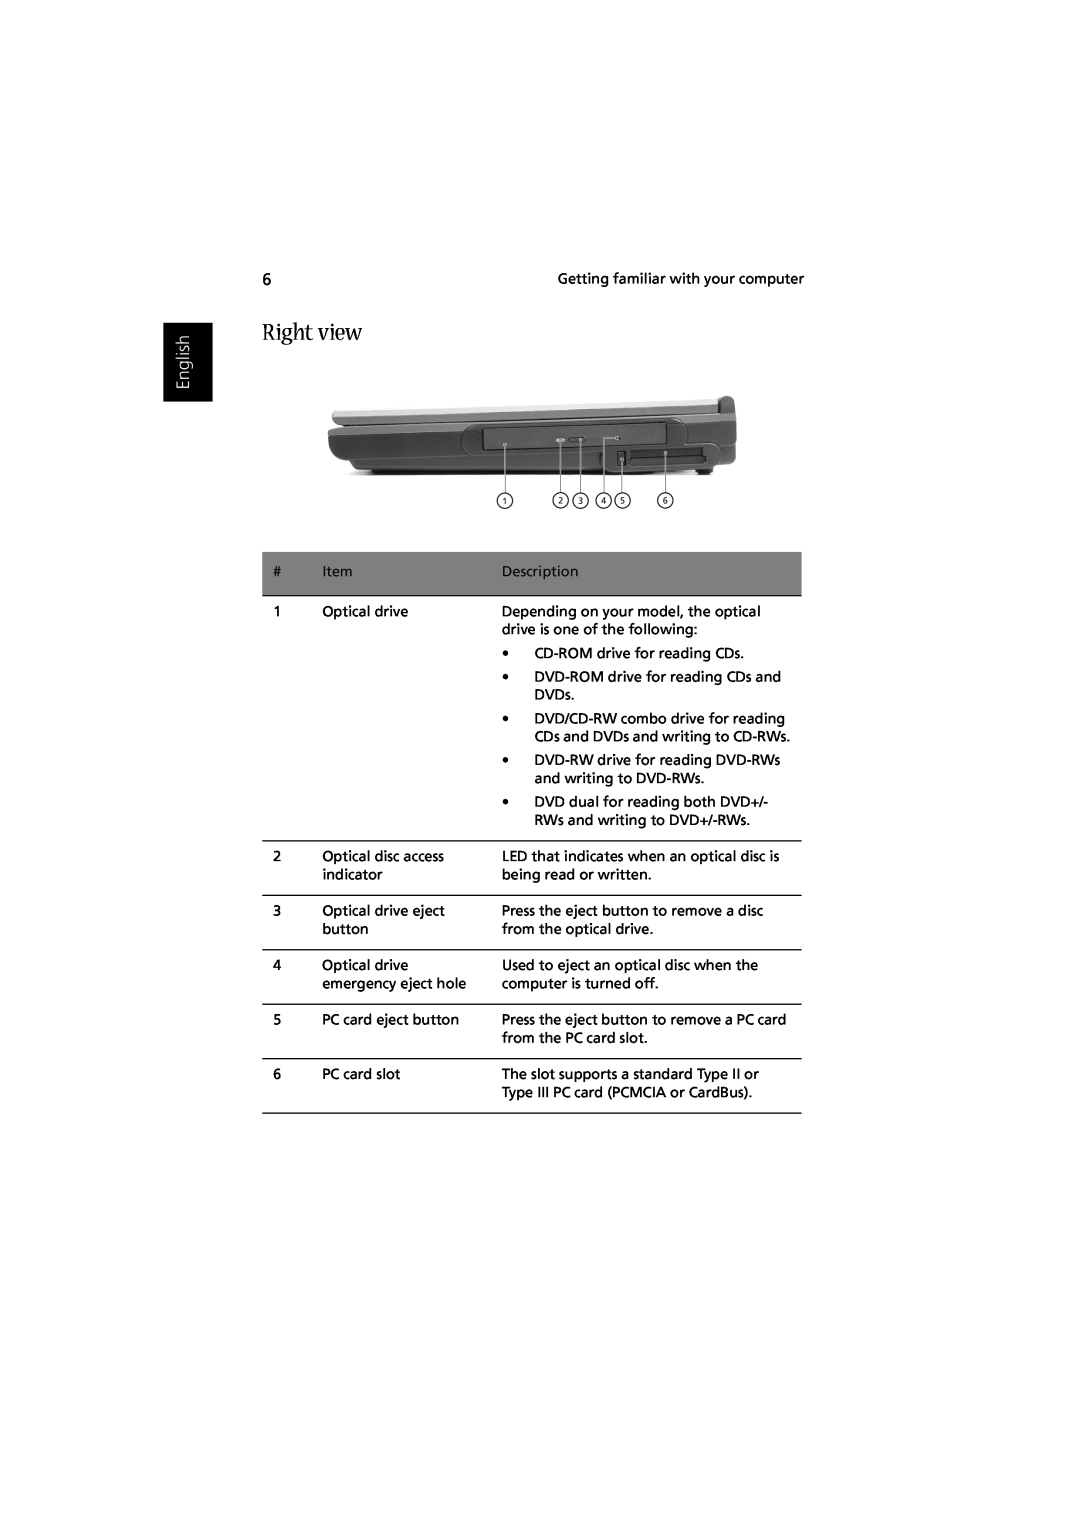 Acer Aspire 1350 manual Right view, English 